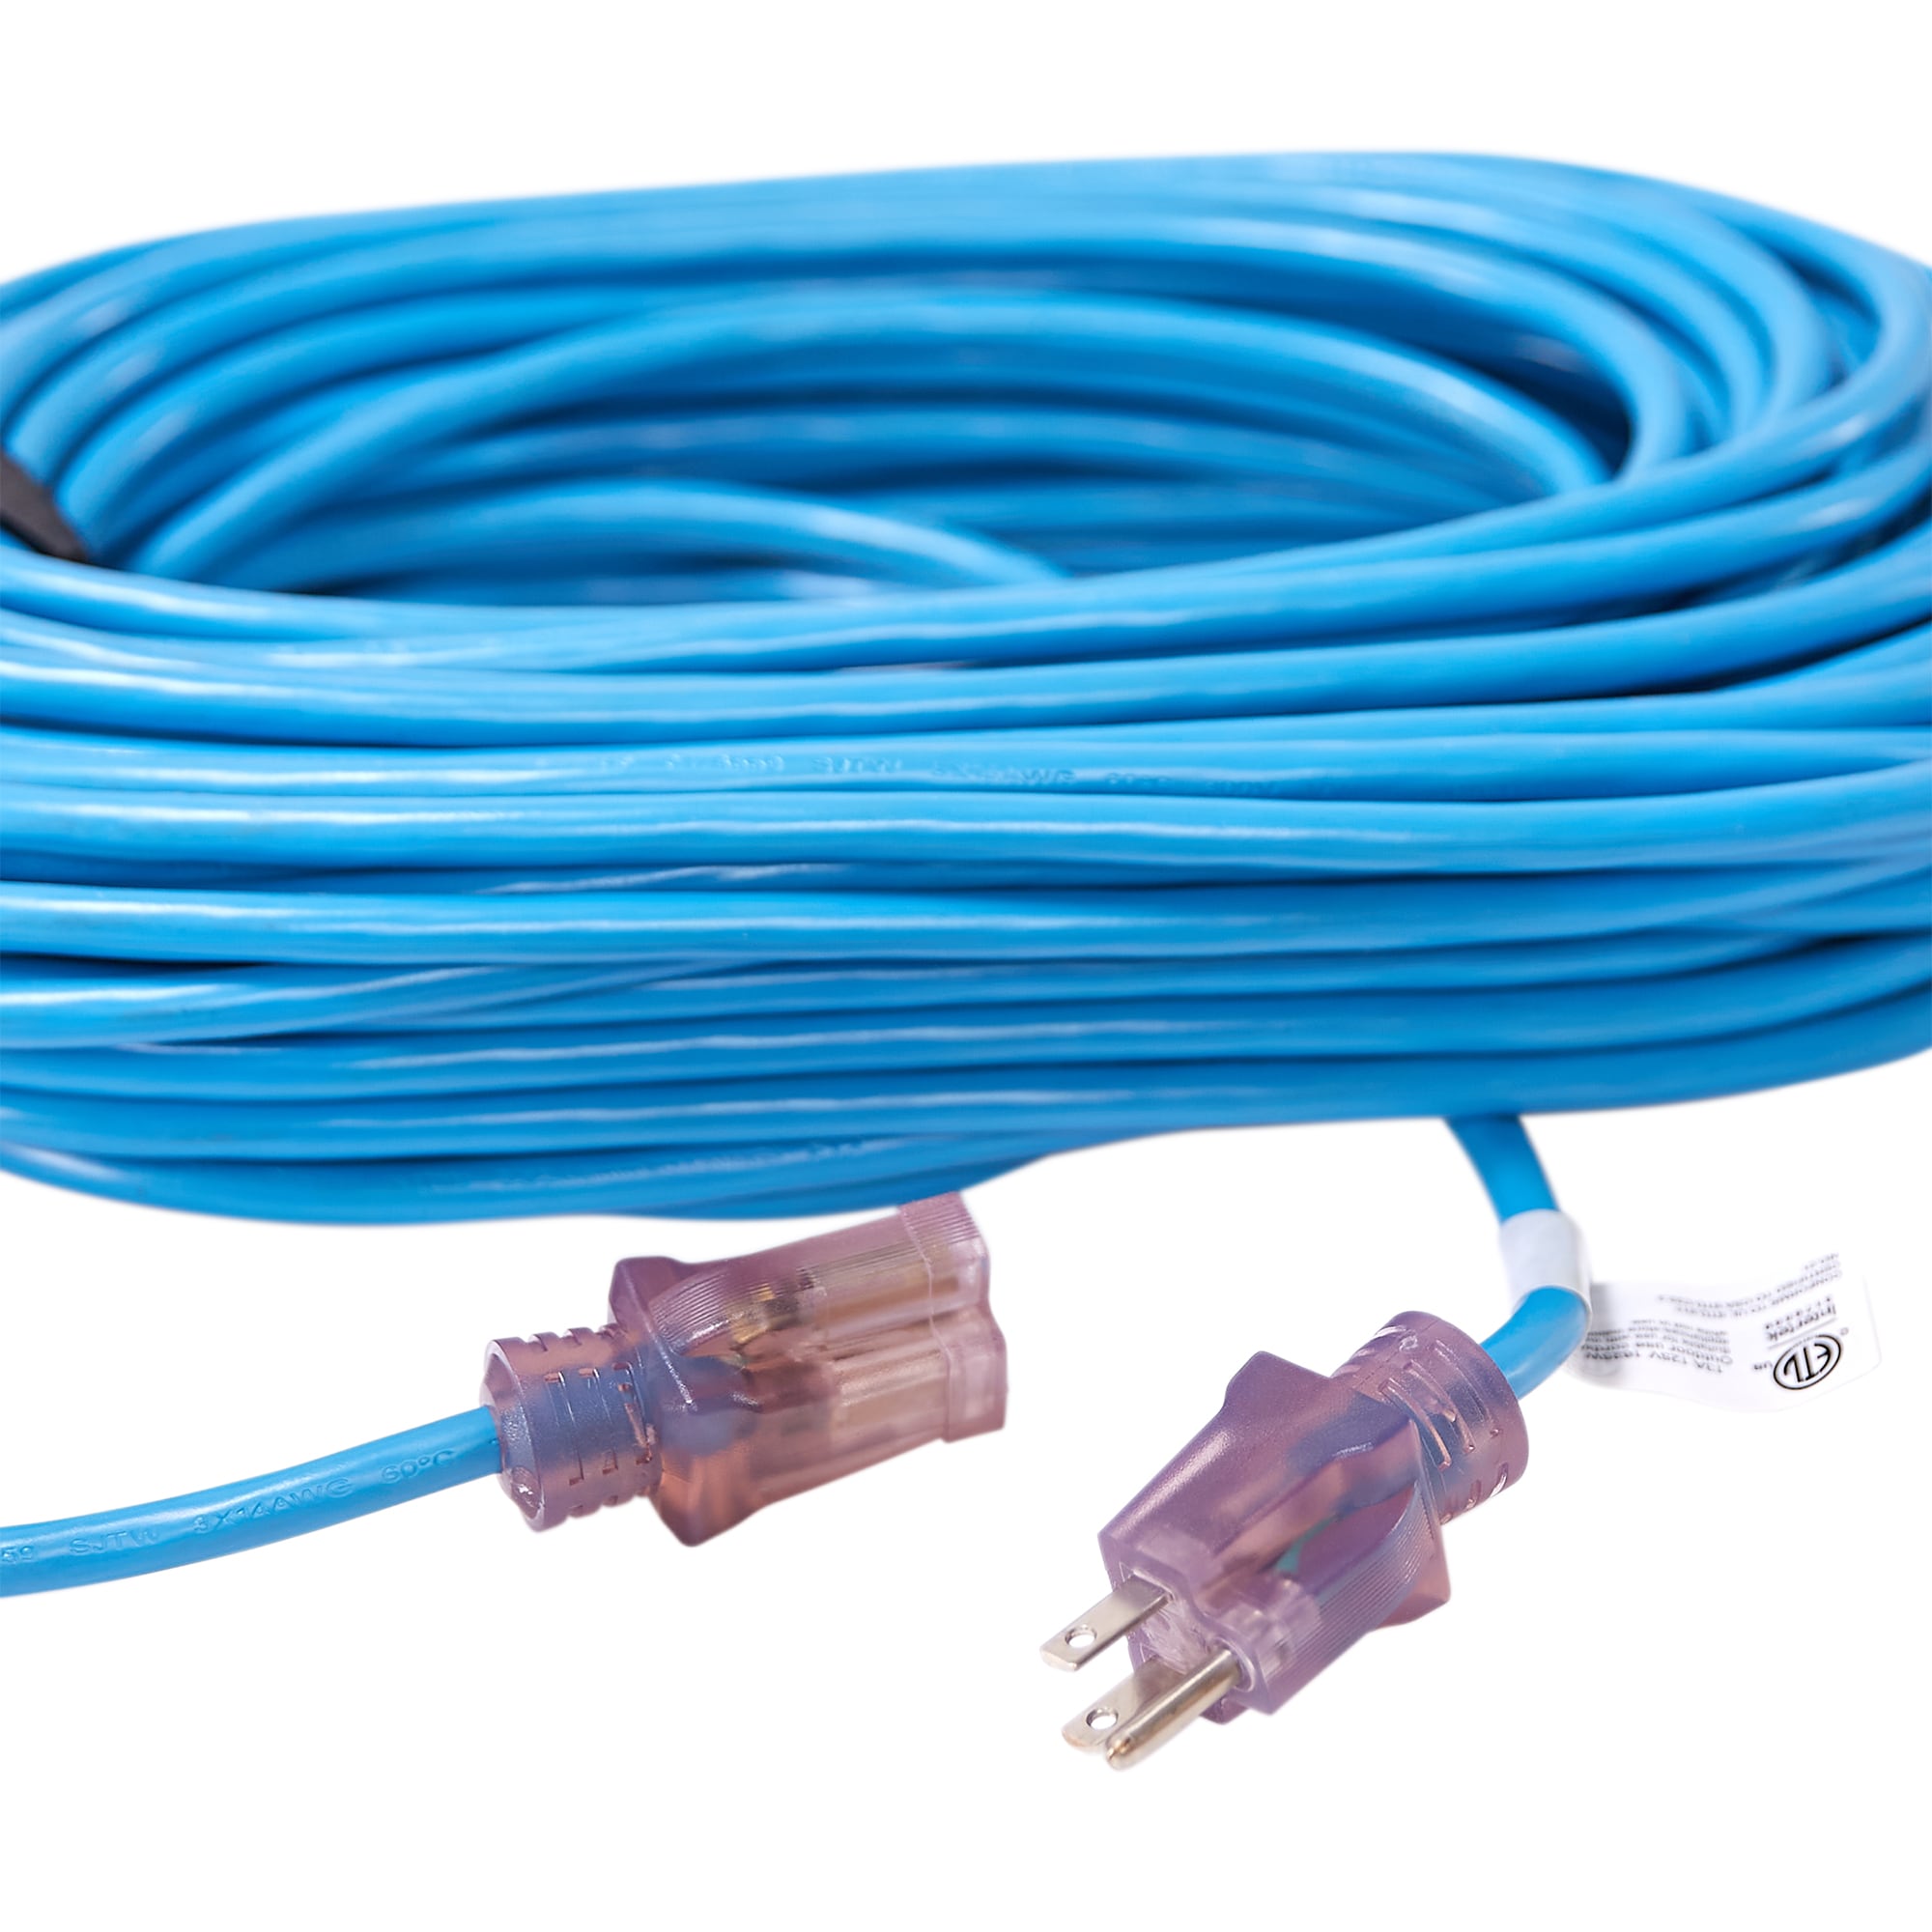 20tl77 1/2 in x 100 ft Utility Cord, 12 Strand, Blue